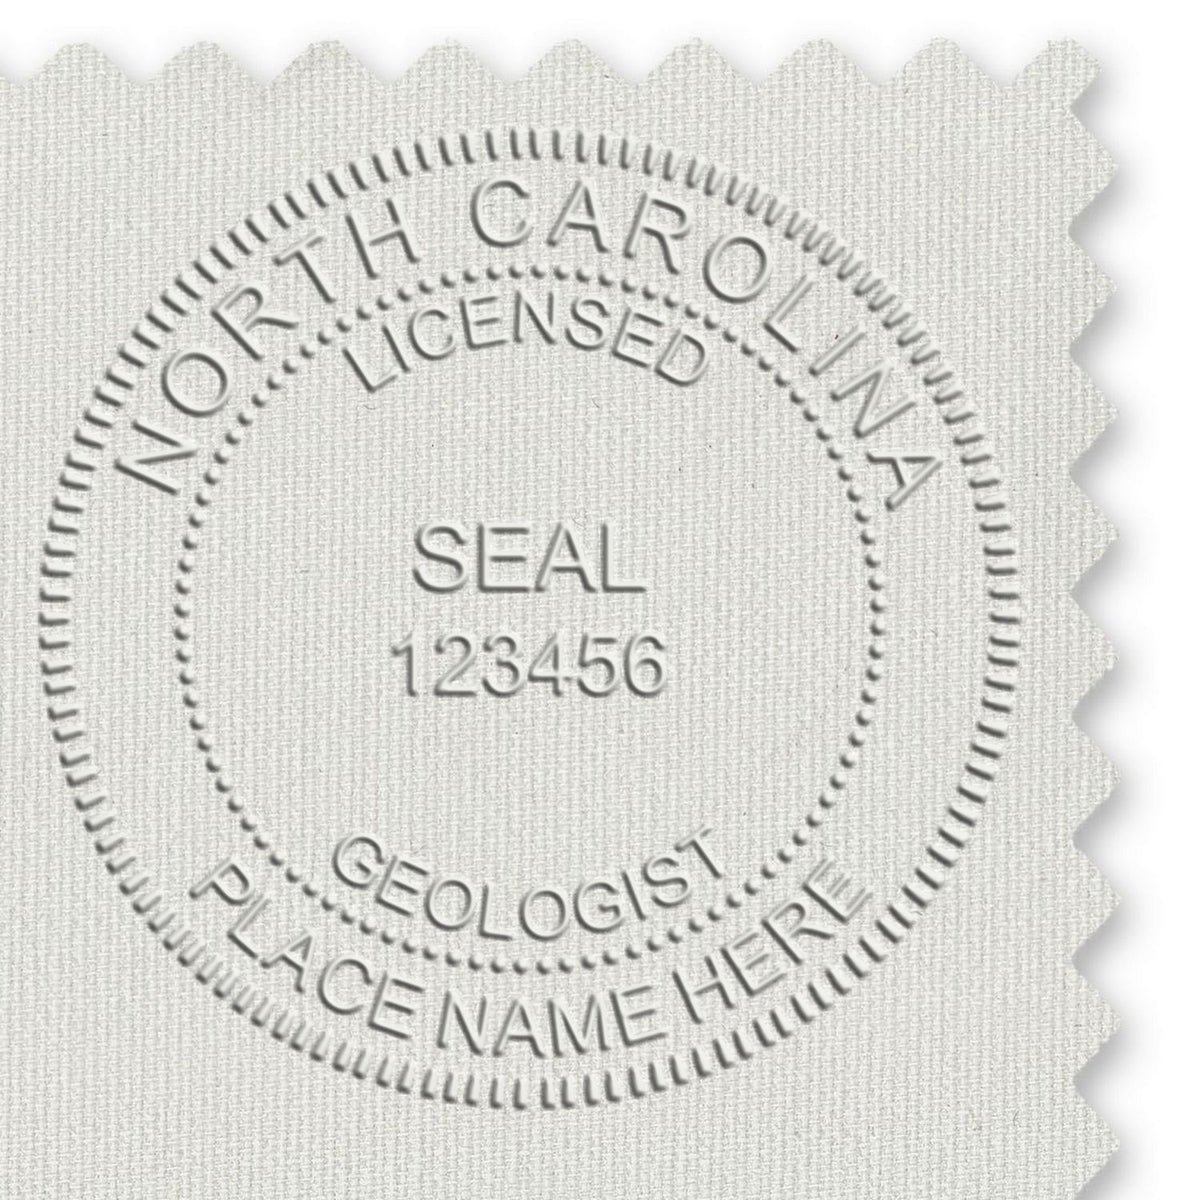 An in use photo of the North Carolina Geologist Desk Seal showing a sample imprint on a cardstock